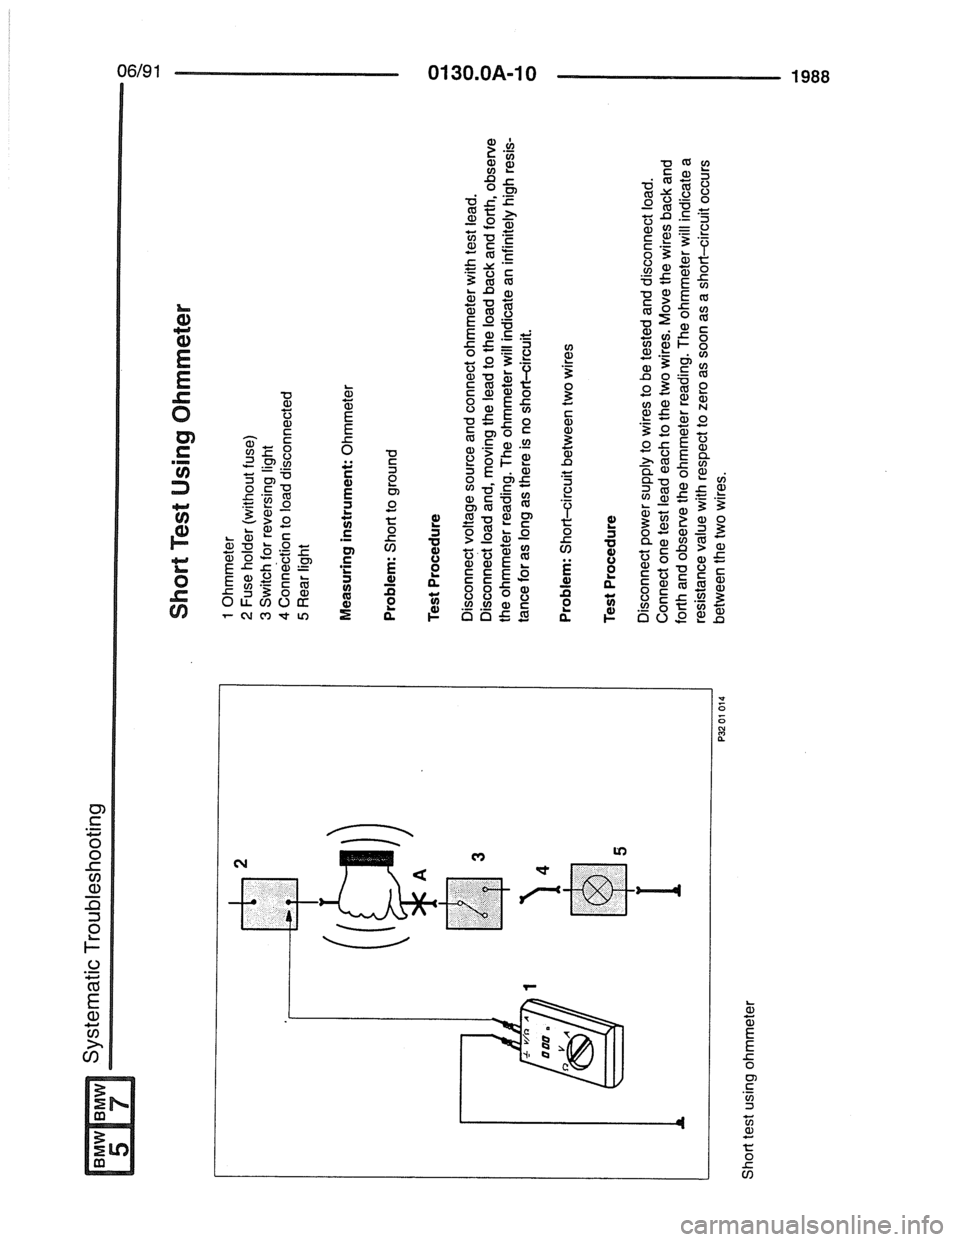 BMW 7 SERIES 1988 E32 Electrical Troubleshooting Manual 